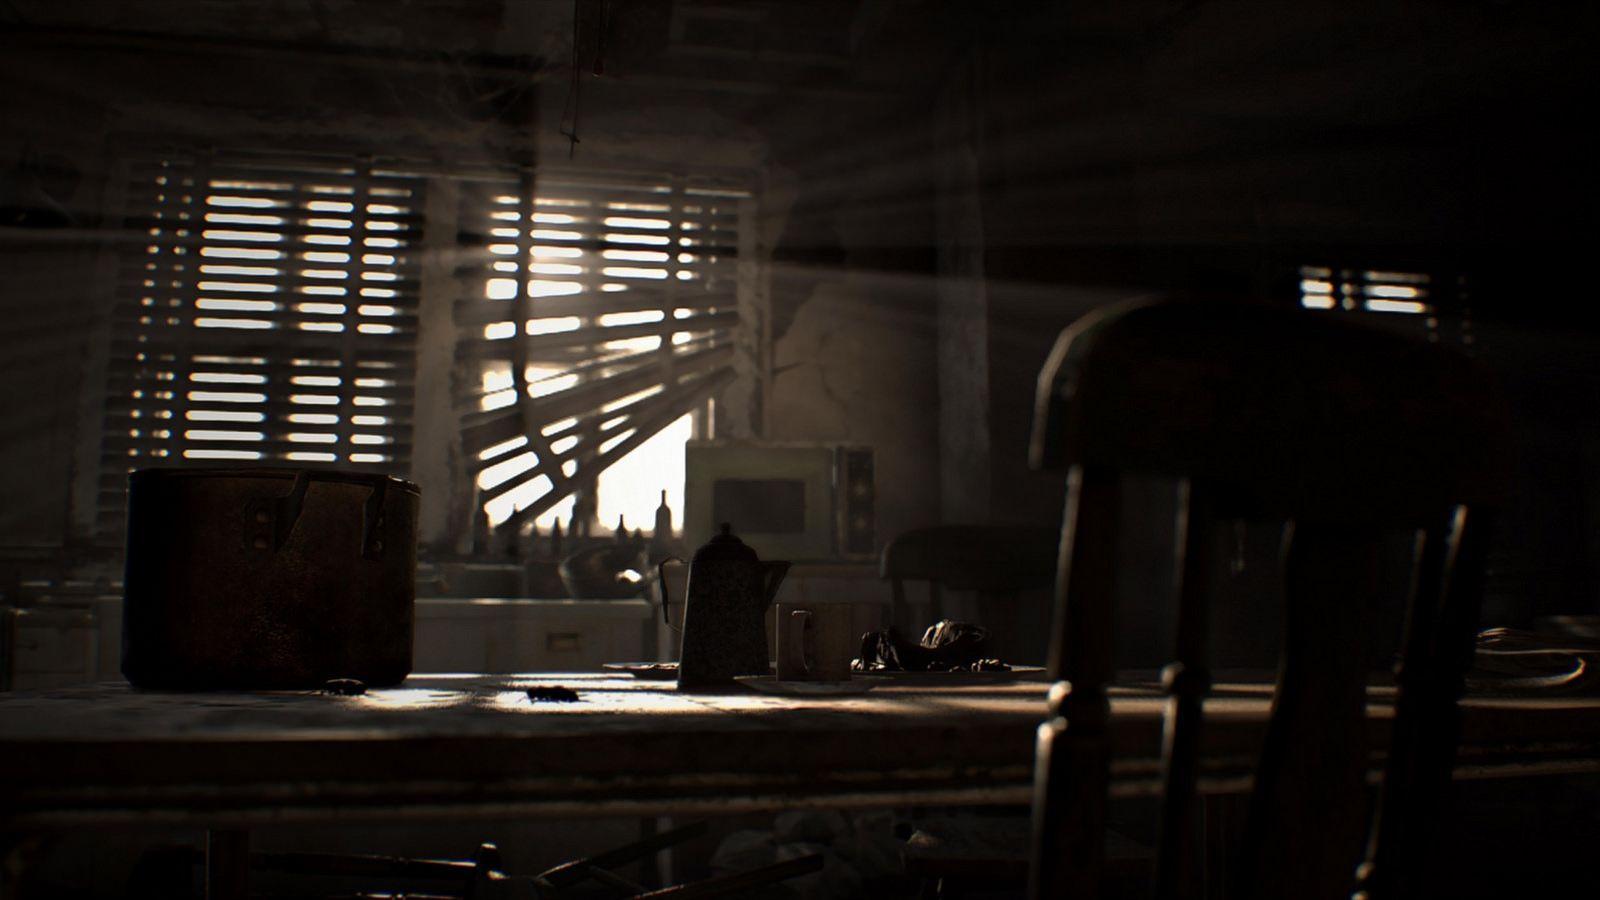 Resident Evil 7 Biohazard unveiled for PS4 & PS VR the demo